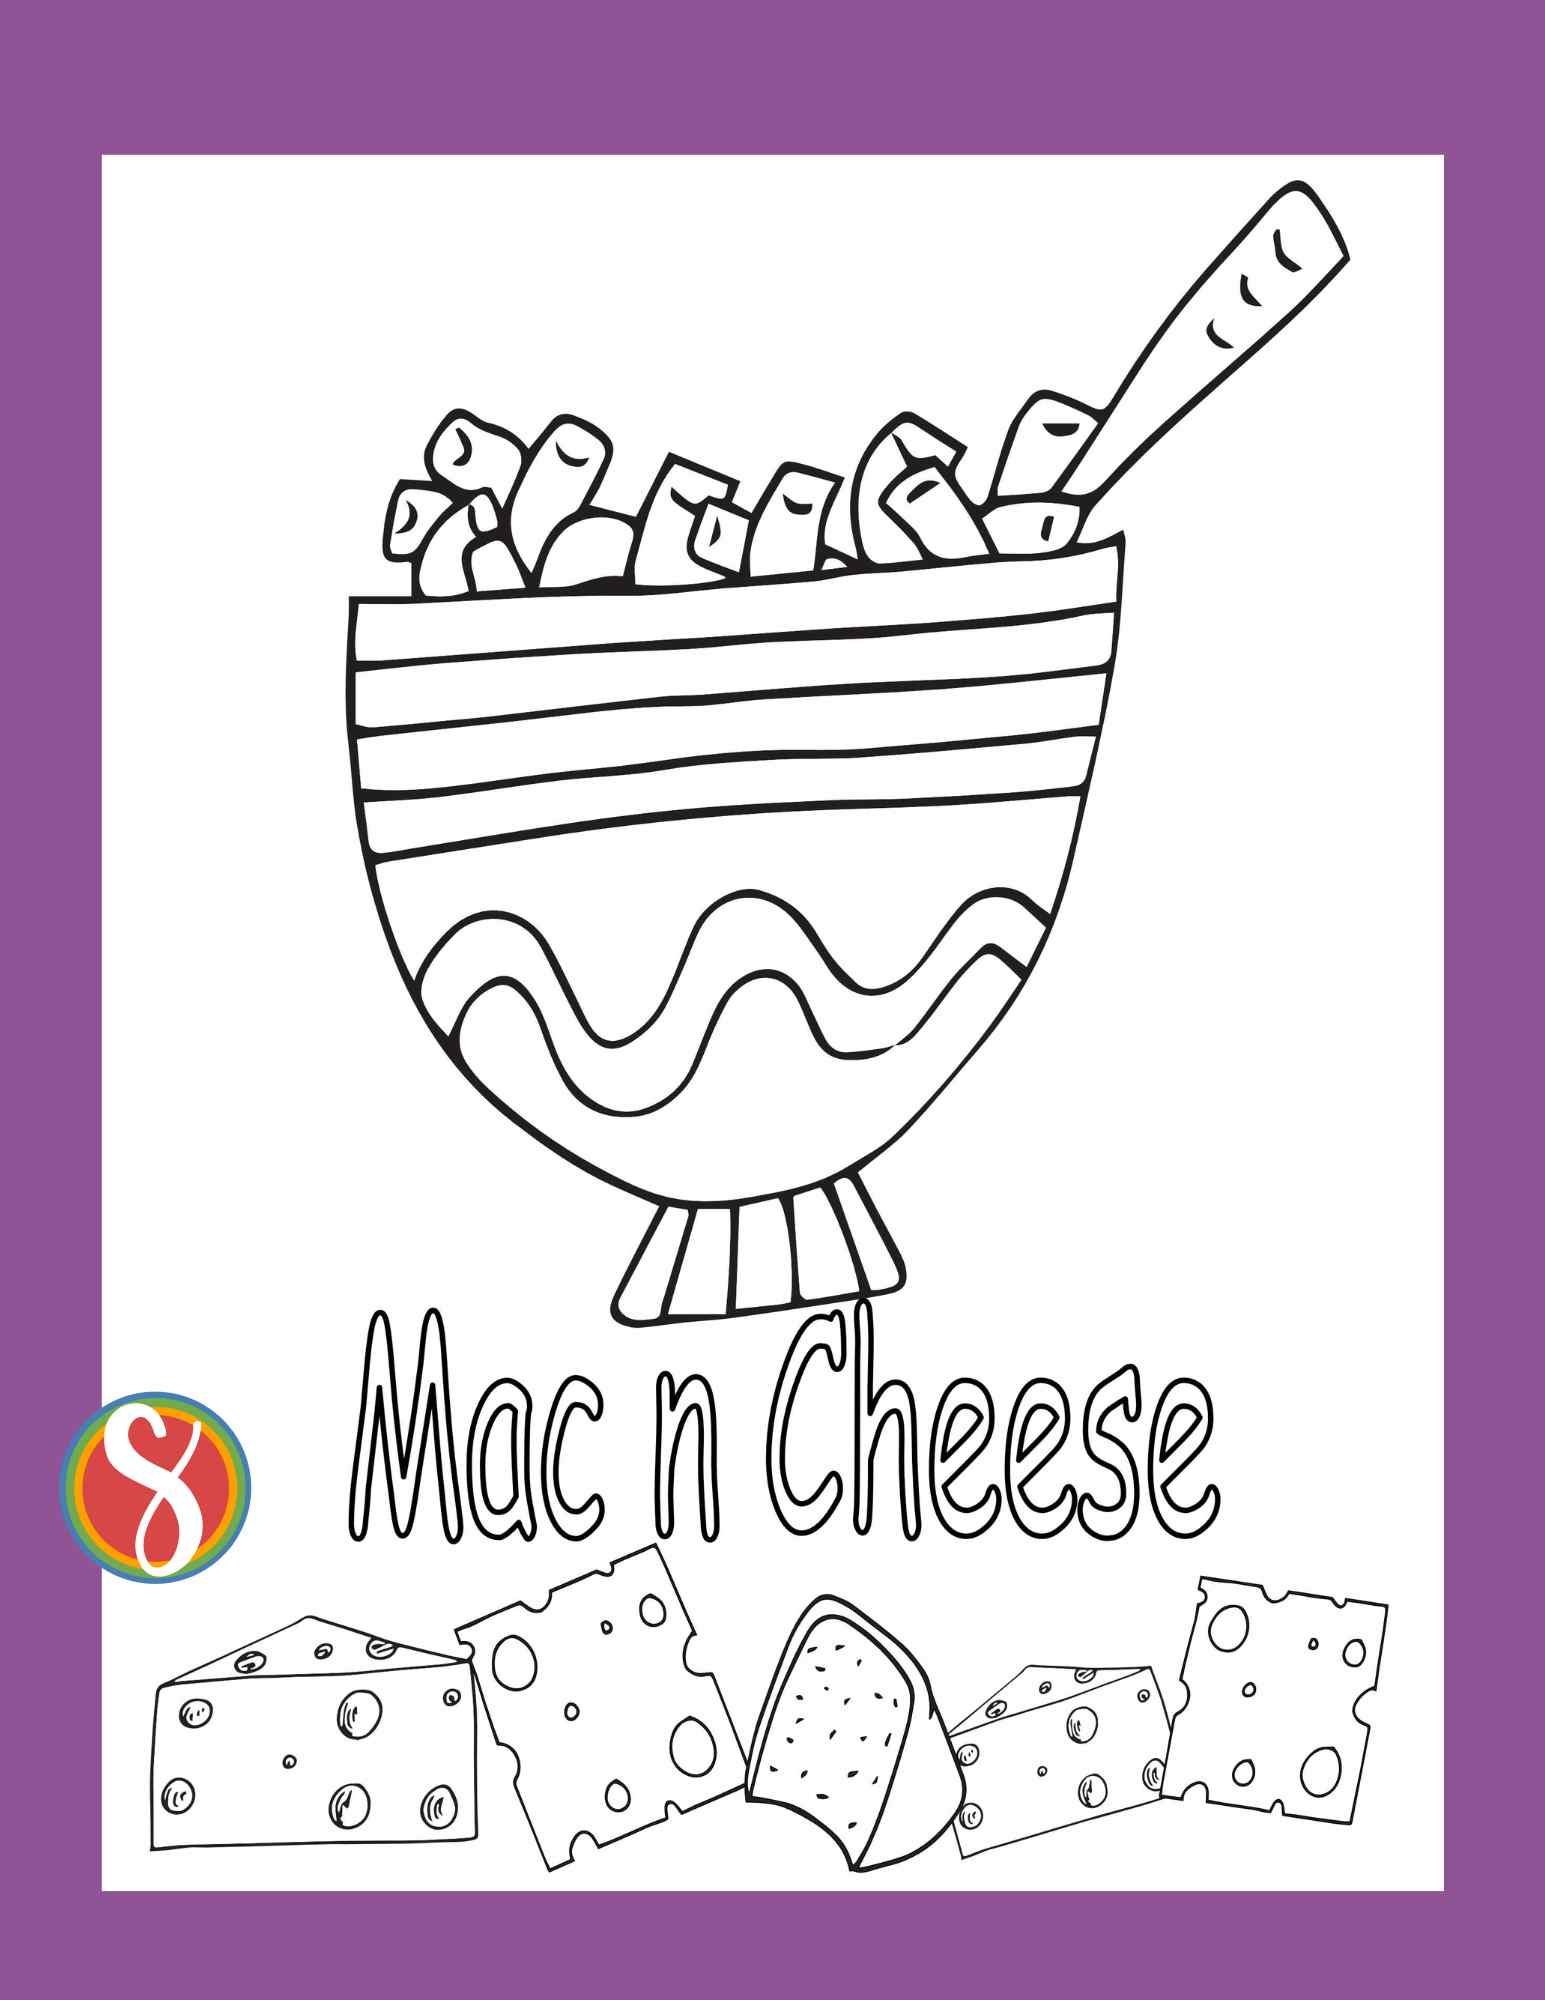 a colorable bowl of Macaroni, colorable words "Mac n Cheese" and a line of colorable cheese wedges and slices